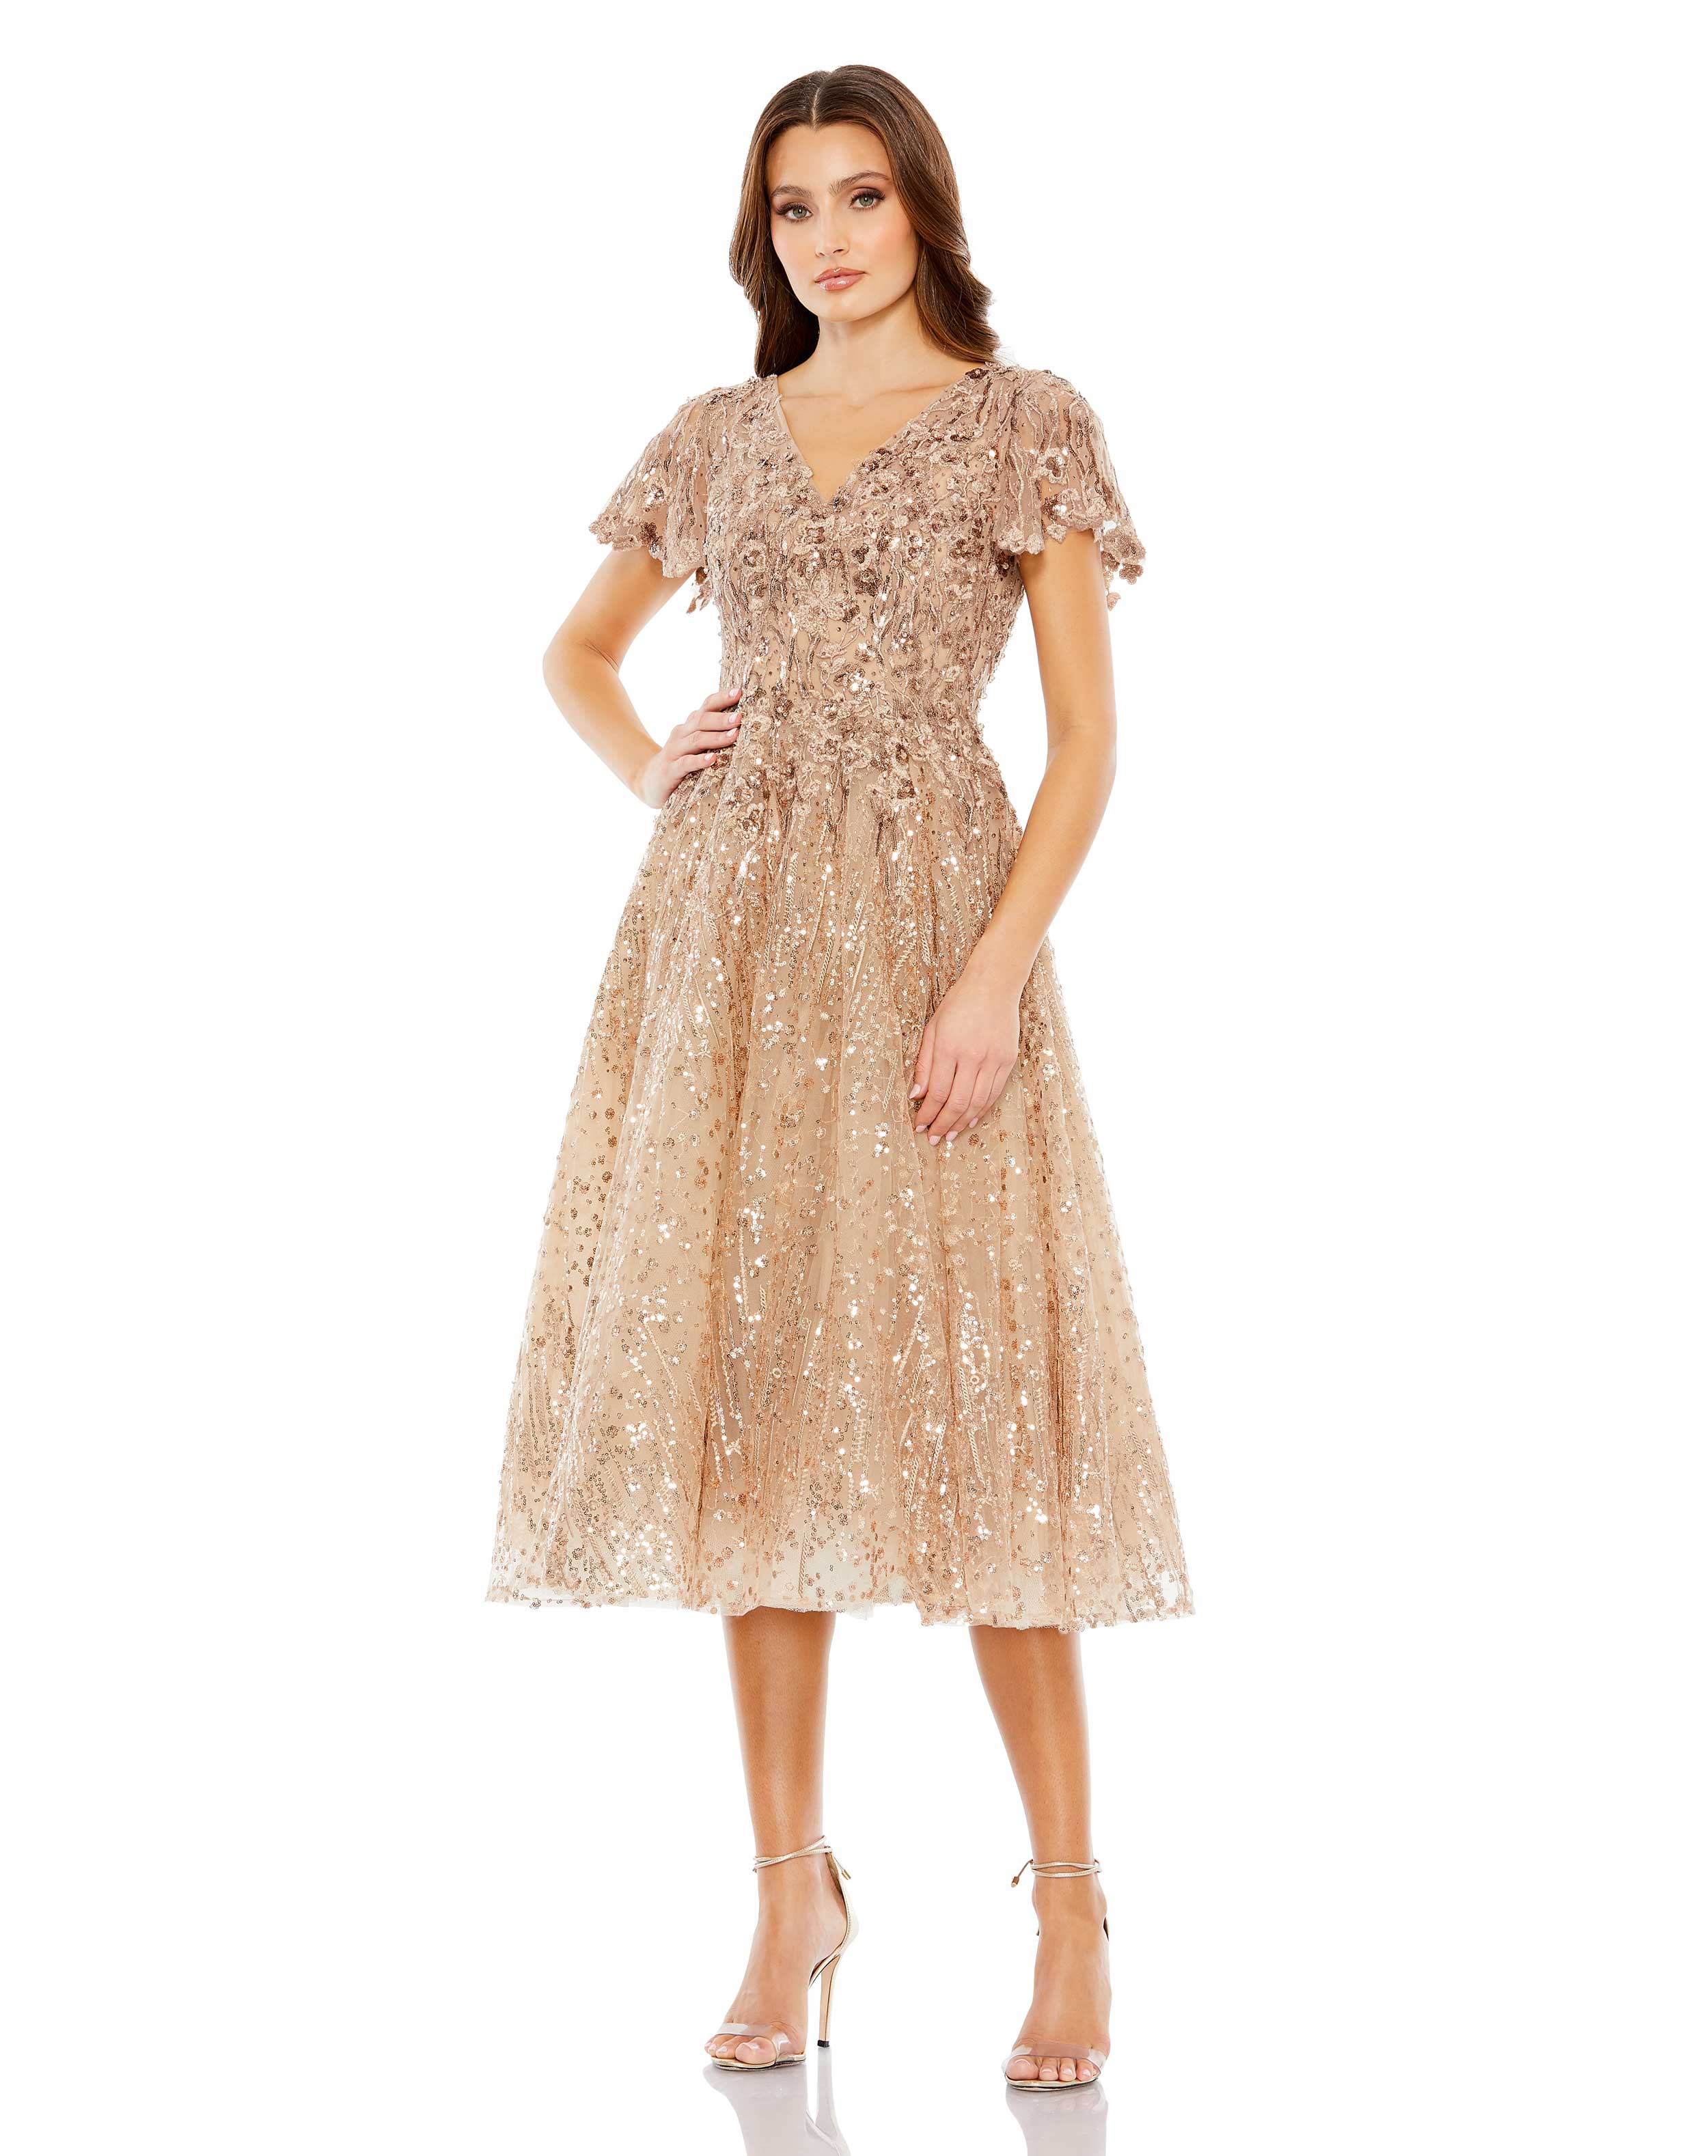 Embellished Butterfly Fit and Flare Tea-Length Dress